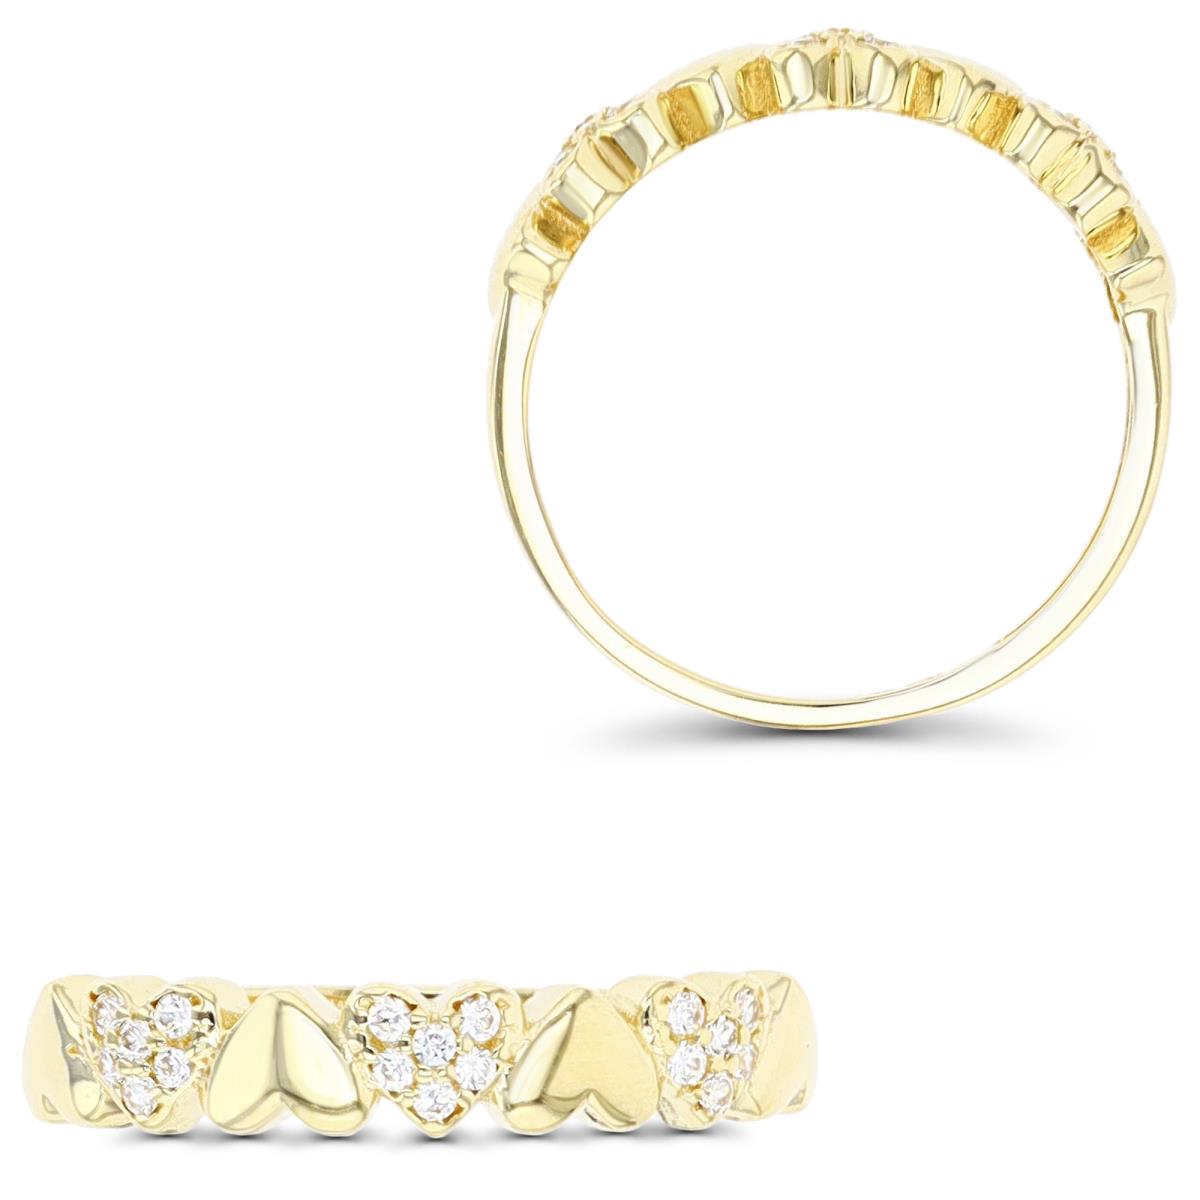 10K Yellow Gold Polished & Pave Alternating Heart Ring